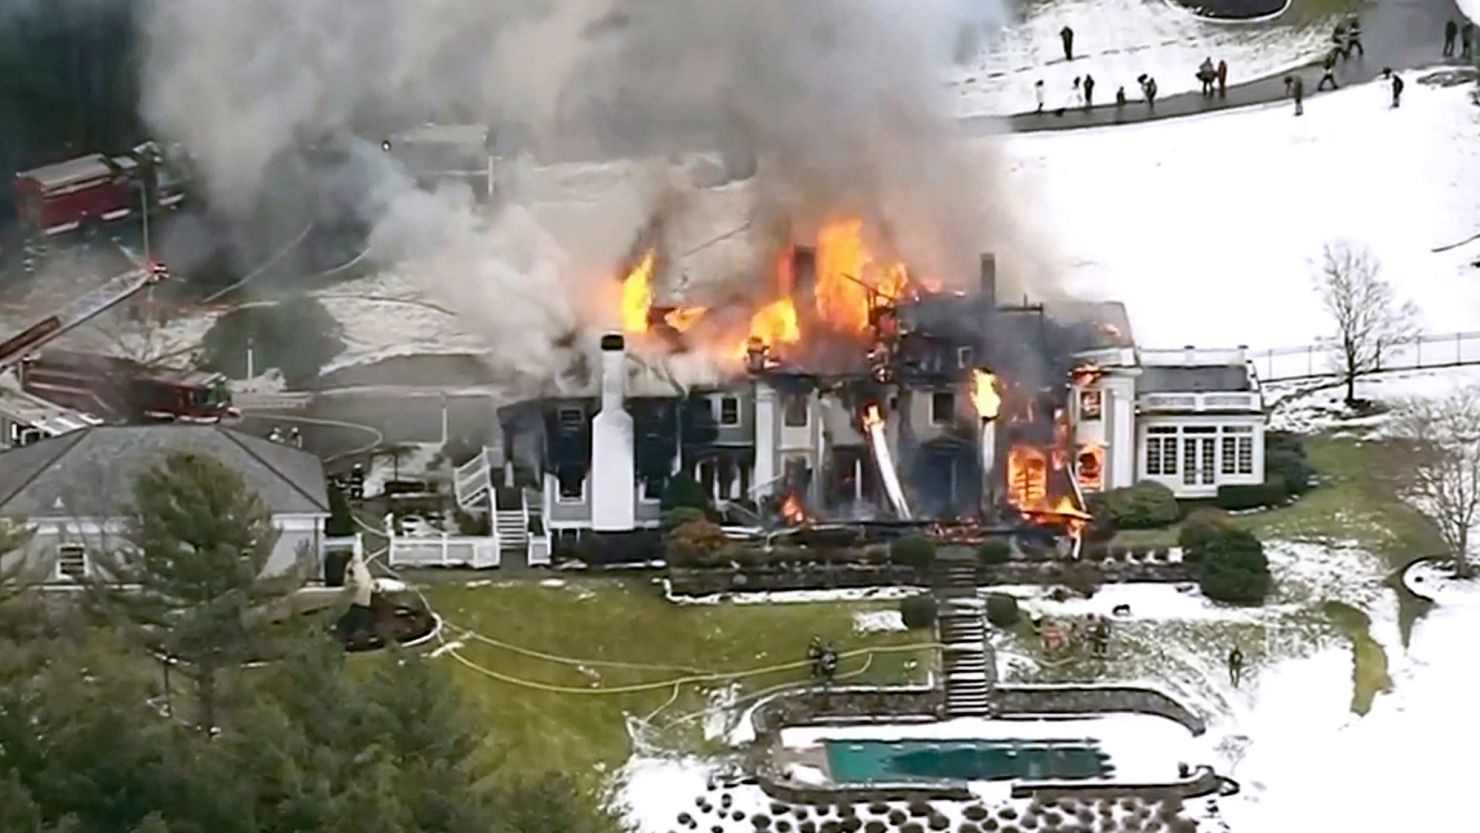 A still image from video provided by WCVB shows a mansion ablaze in Concord, Massachusetts, on December 27, 2019.